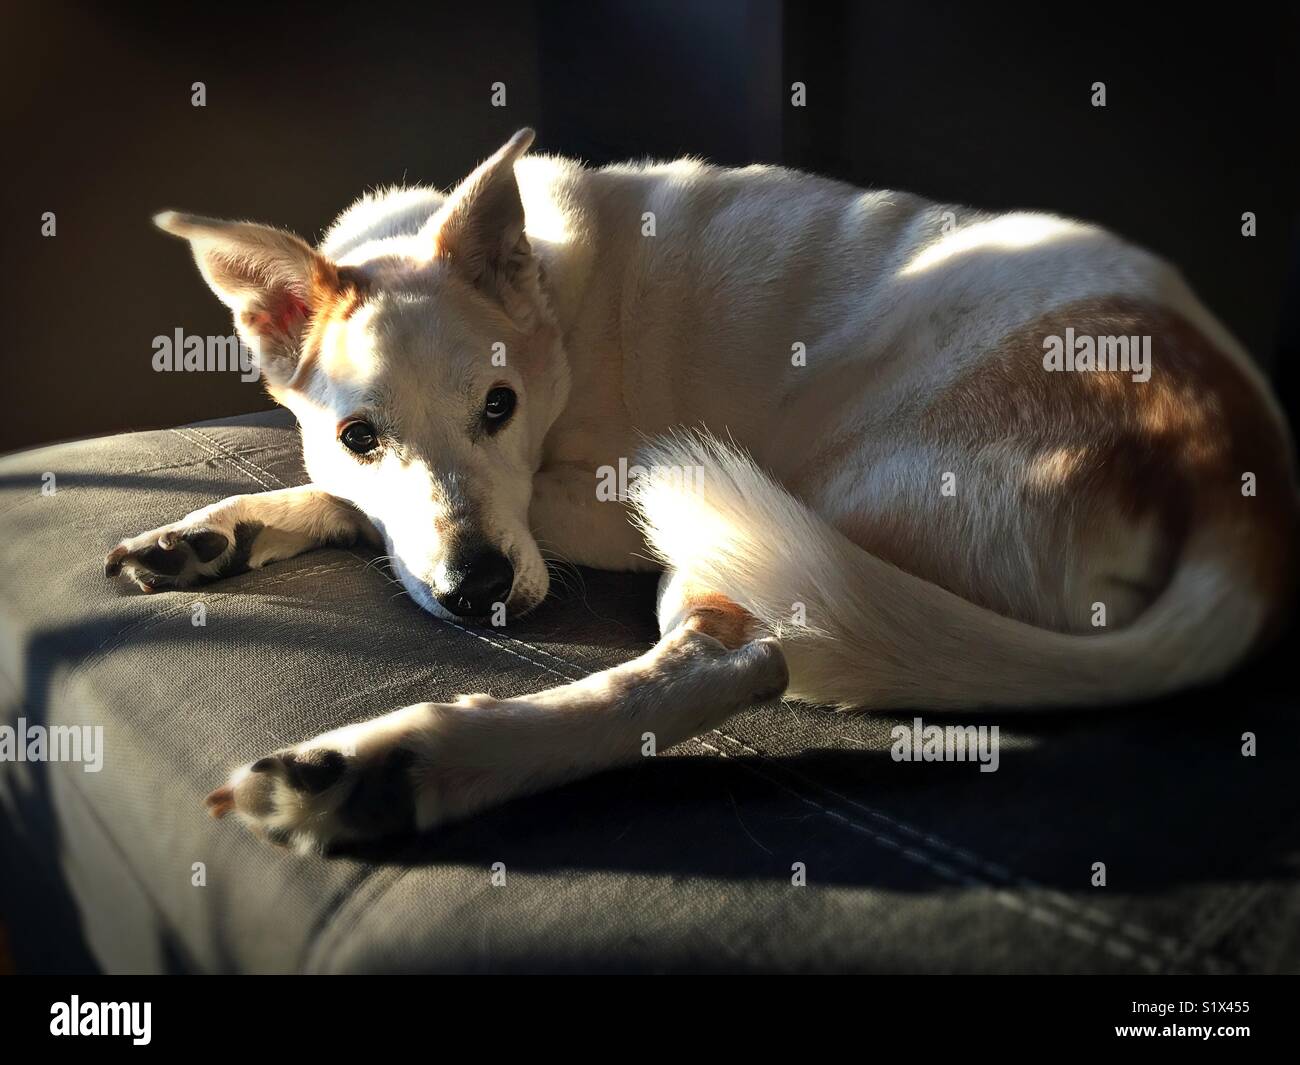 A dog lying on a couch. Stock Photo